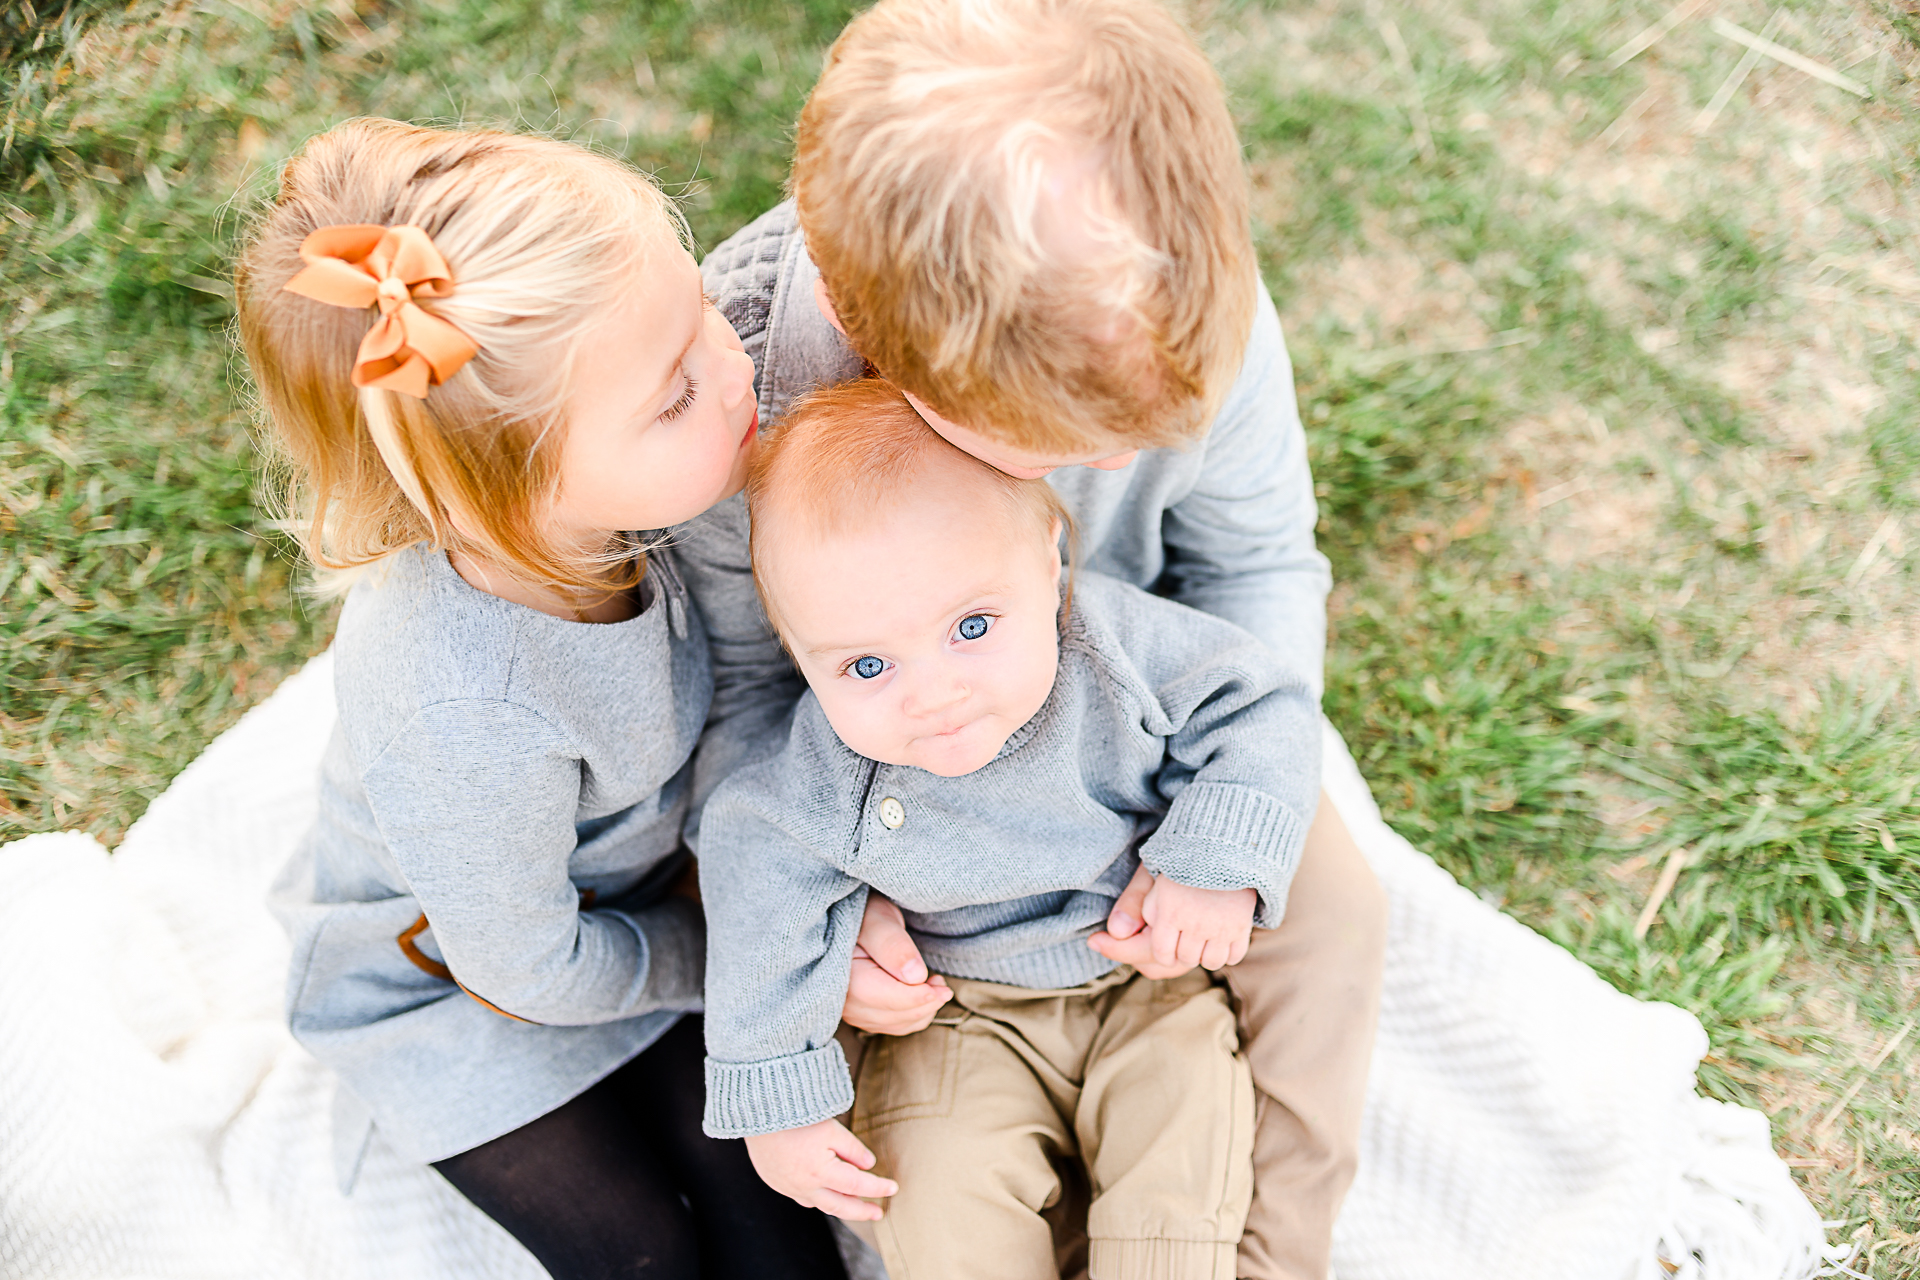 Photo by Norwell Photographer Christina Runnals | Boy and girl holding their baby brother